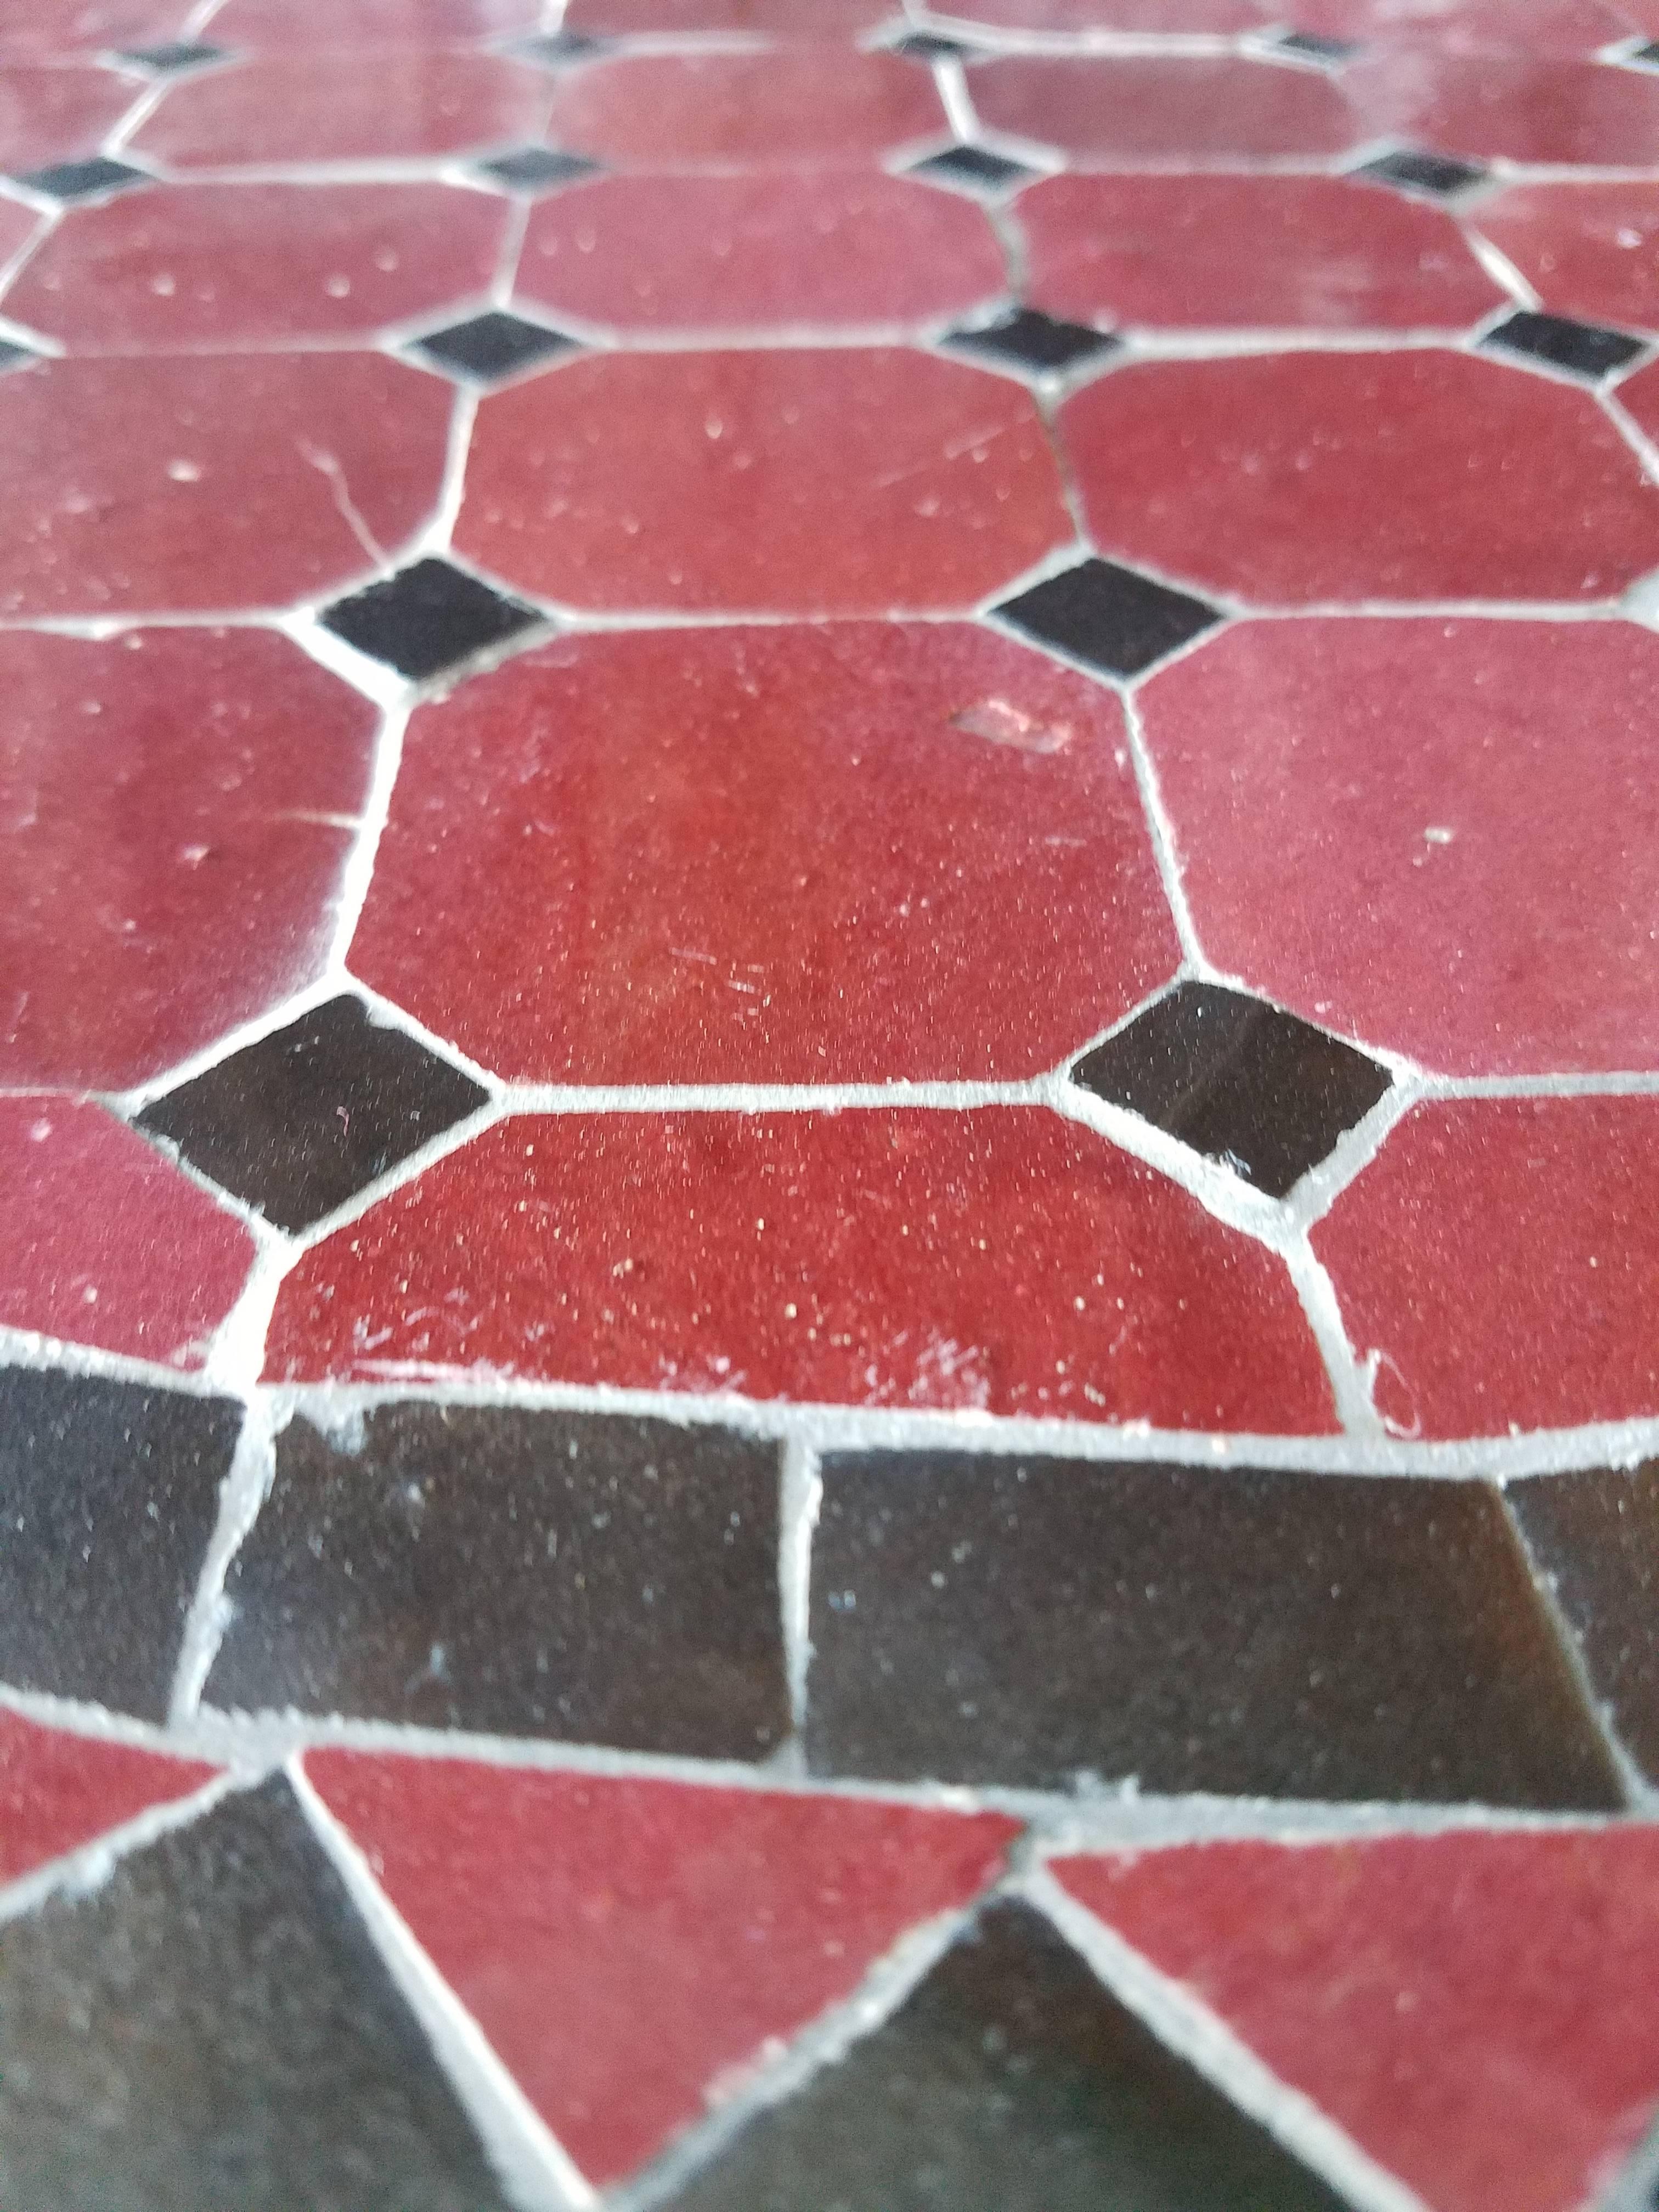 100 % glazed round. Burgundy and black Moroccan mosaic table measuring approximately 24″ in diameter. For both indoors and outdoors. Great as a cocktail table. Vibrant color. Intricate patterns. Included in the price is a wrought iron folding base.